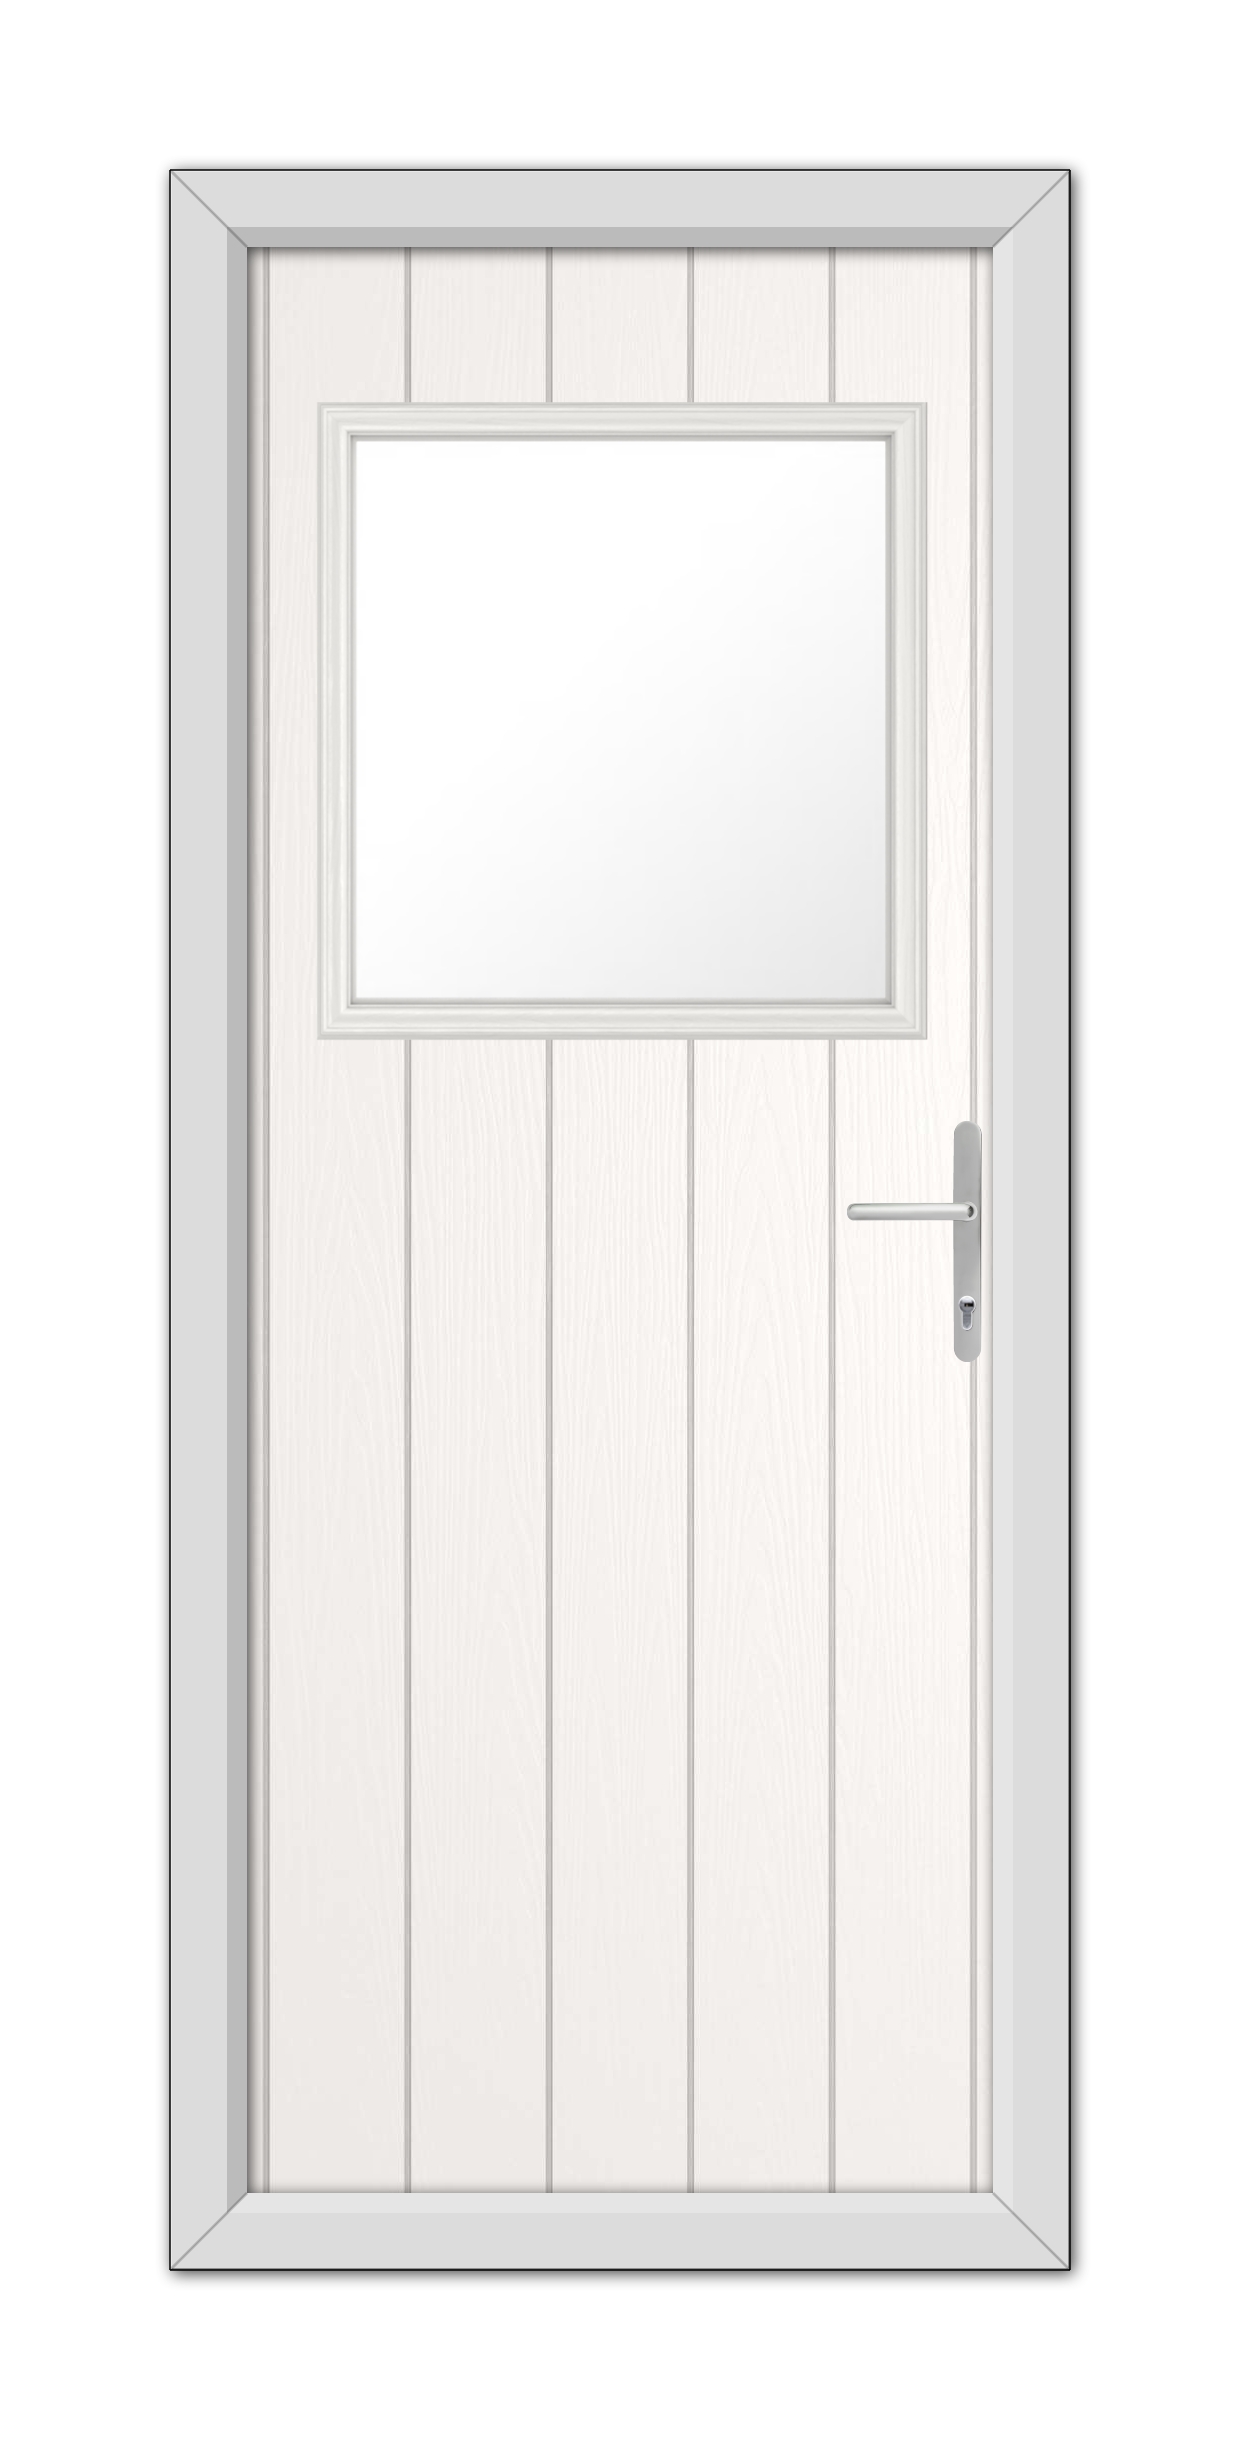 A modern White Fife Composite Door 48mm Timber Core featuring a rectangular window at the top and a metal handle on the right side.